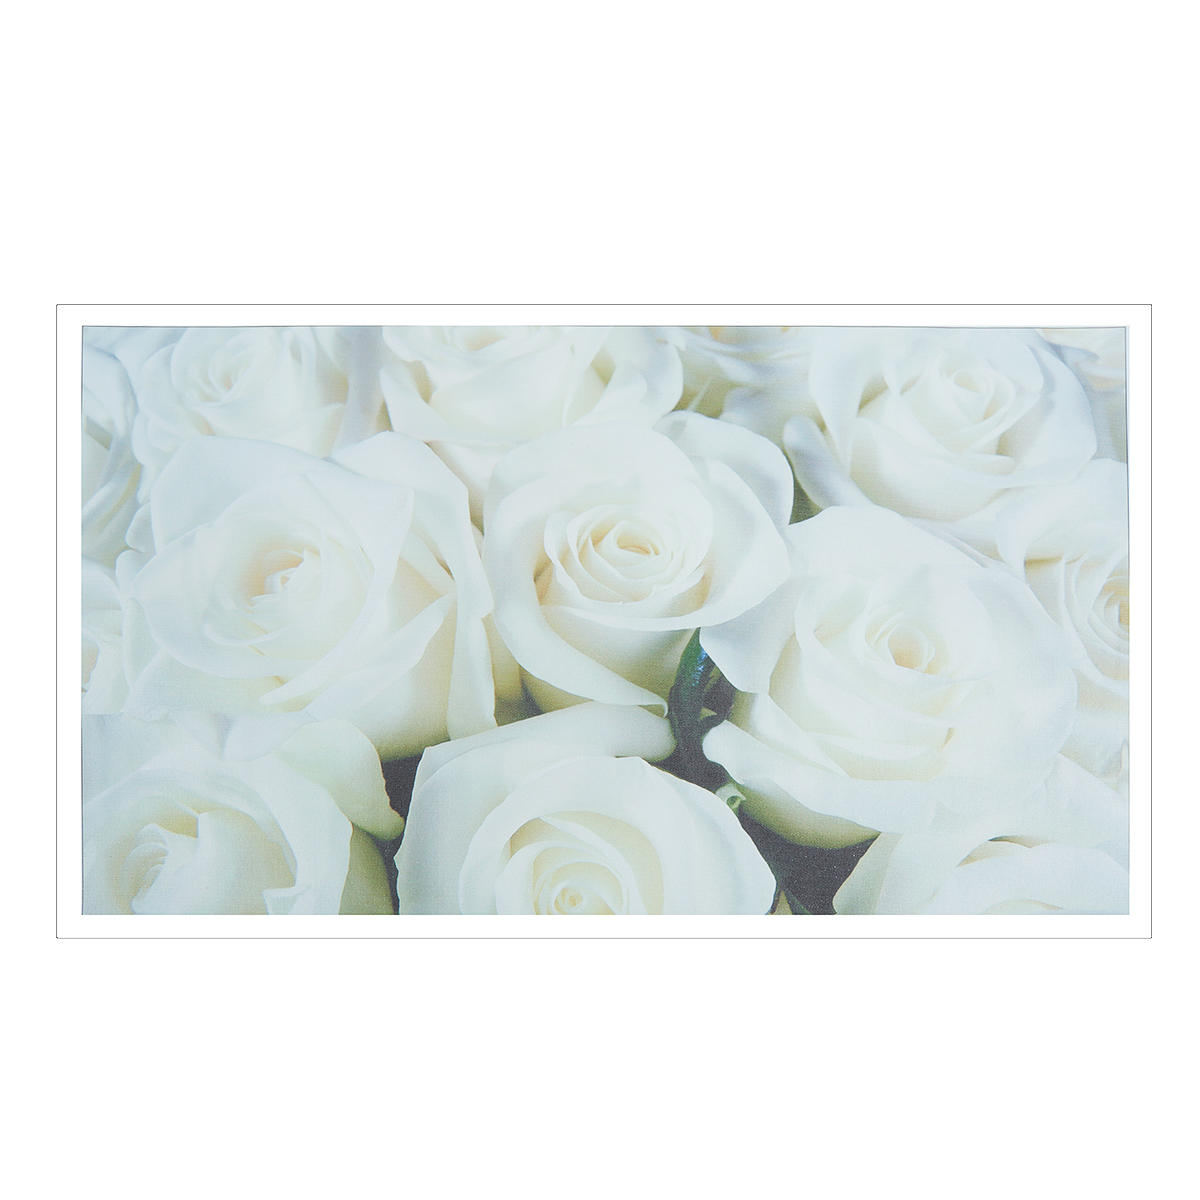 Unframed Modern Flower White Rose Canvas Picture Poster Paintings Art Wall Decorations